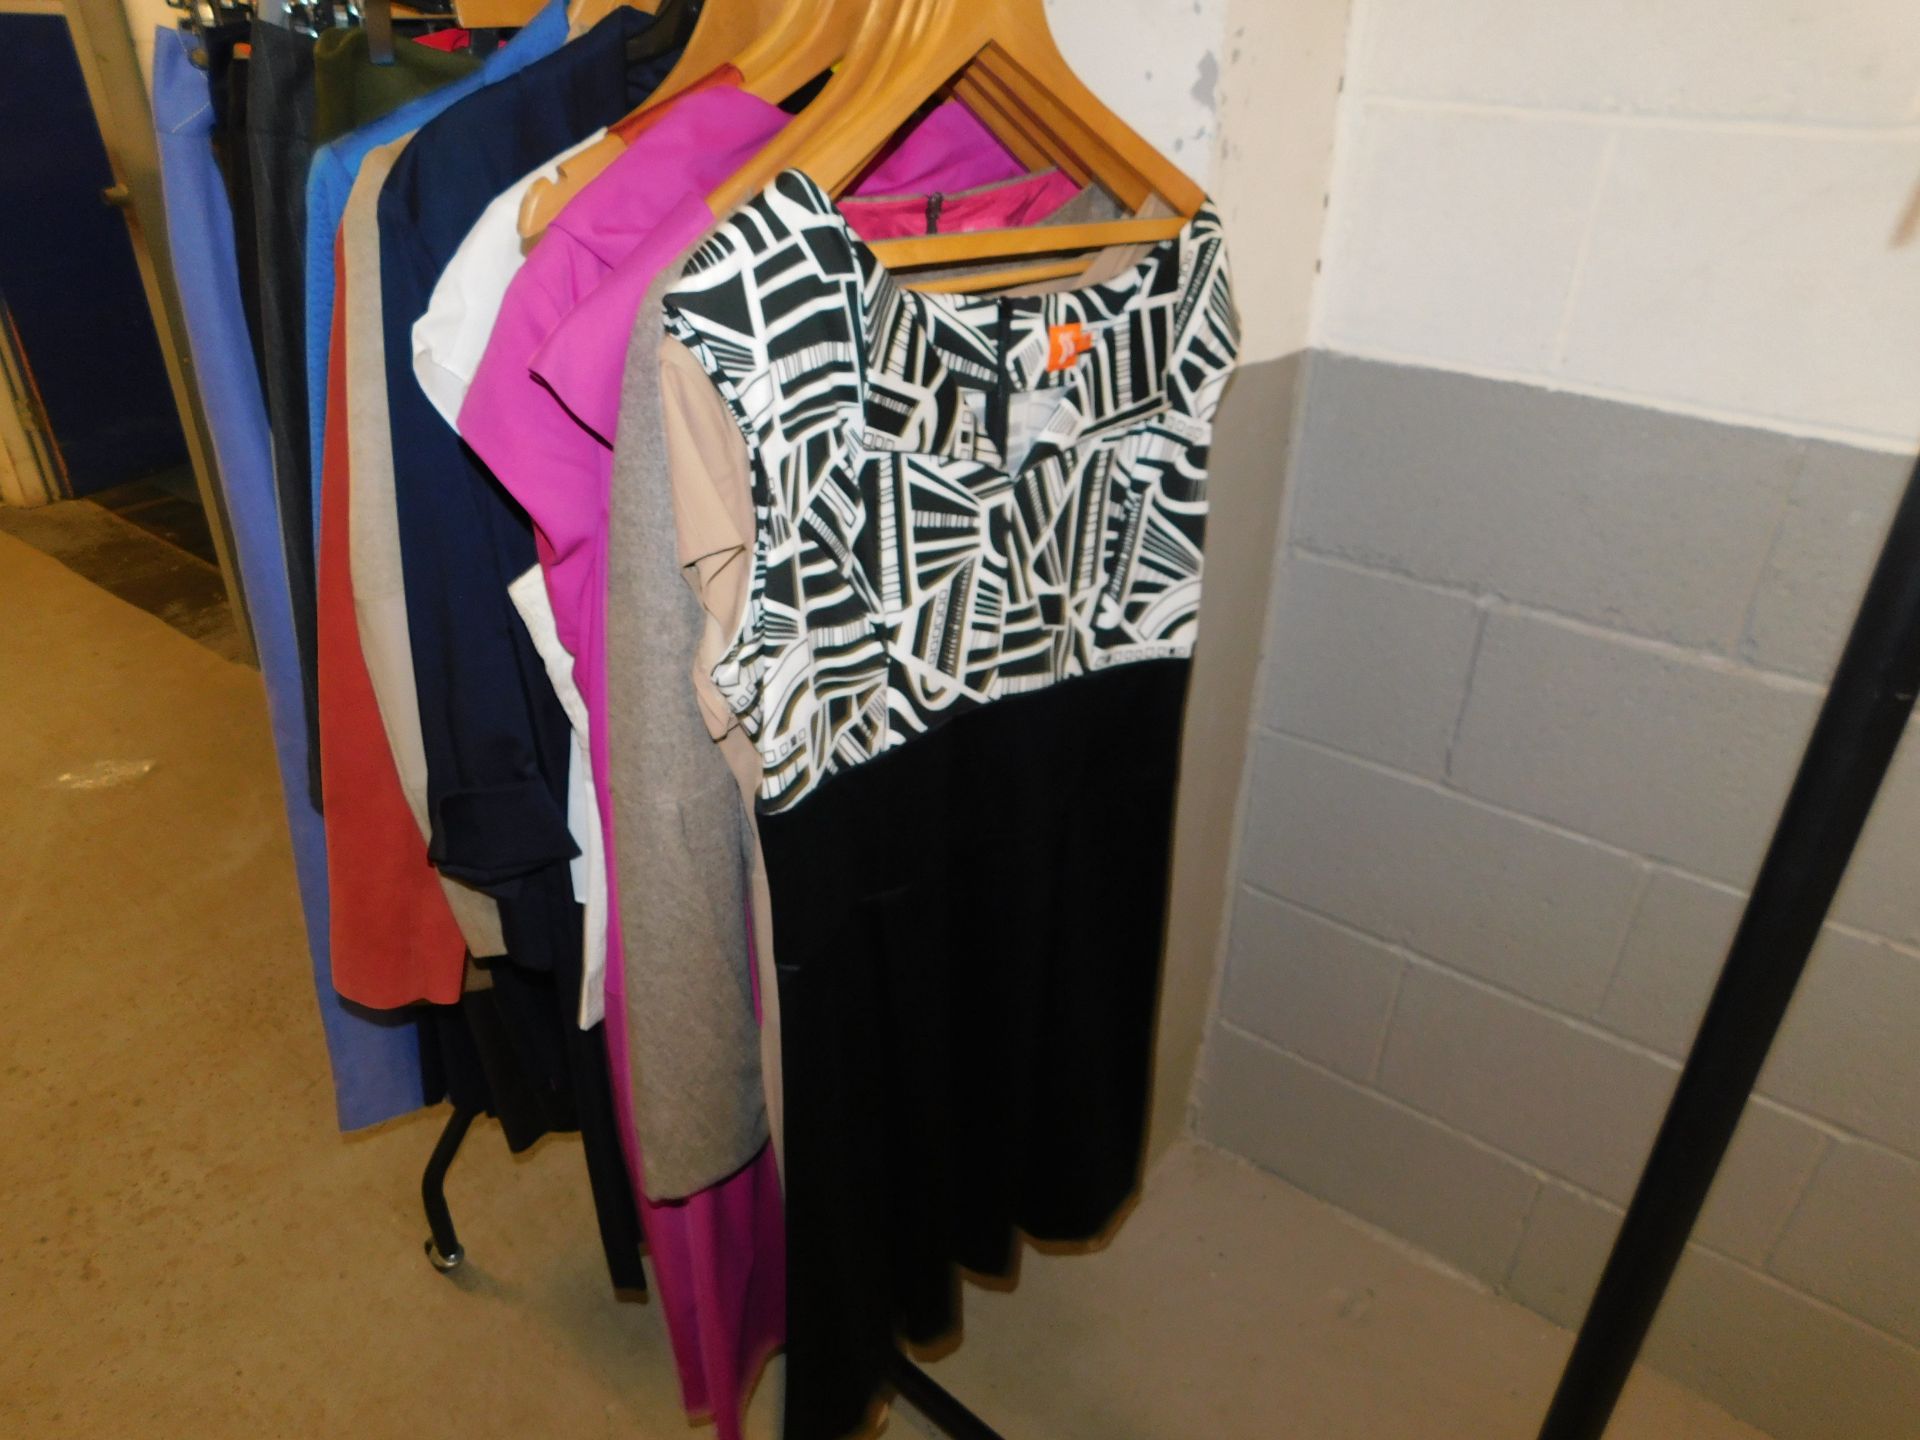 Contents of Rail of "Number 35" Ladies Business Wear, Size 16 (7 Skirts, 8  Tops/Dresses, 6 Jackets, - Image 9 of 9